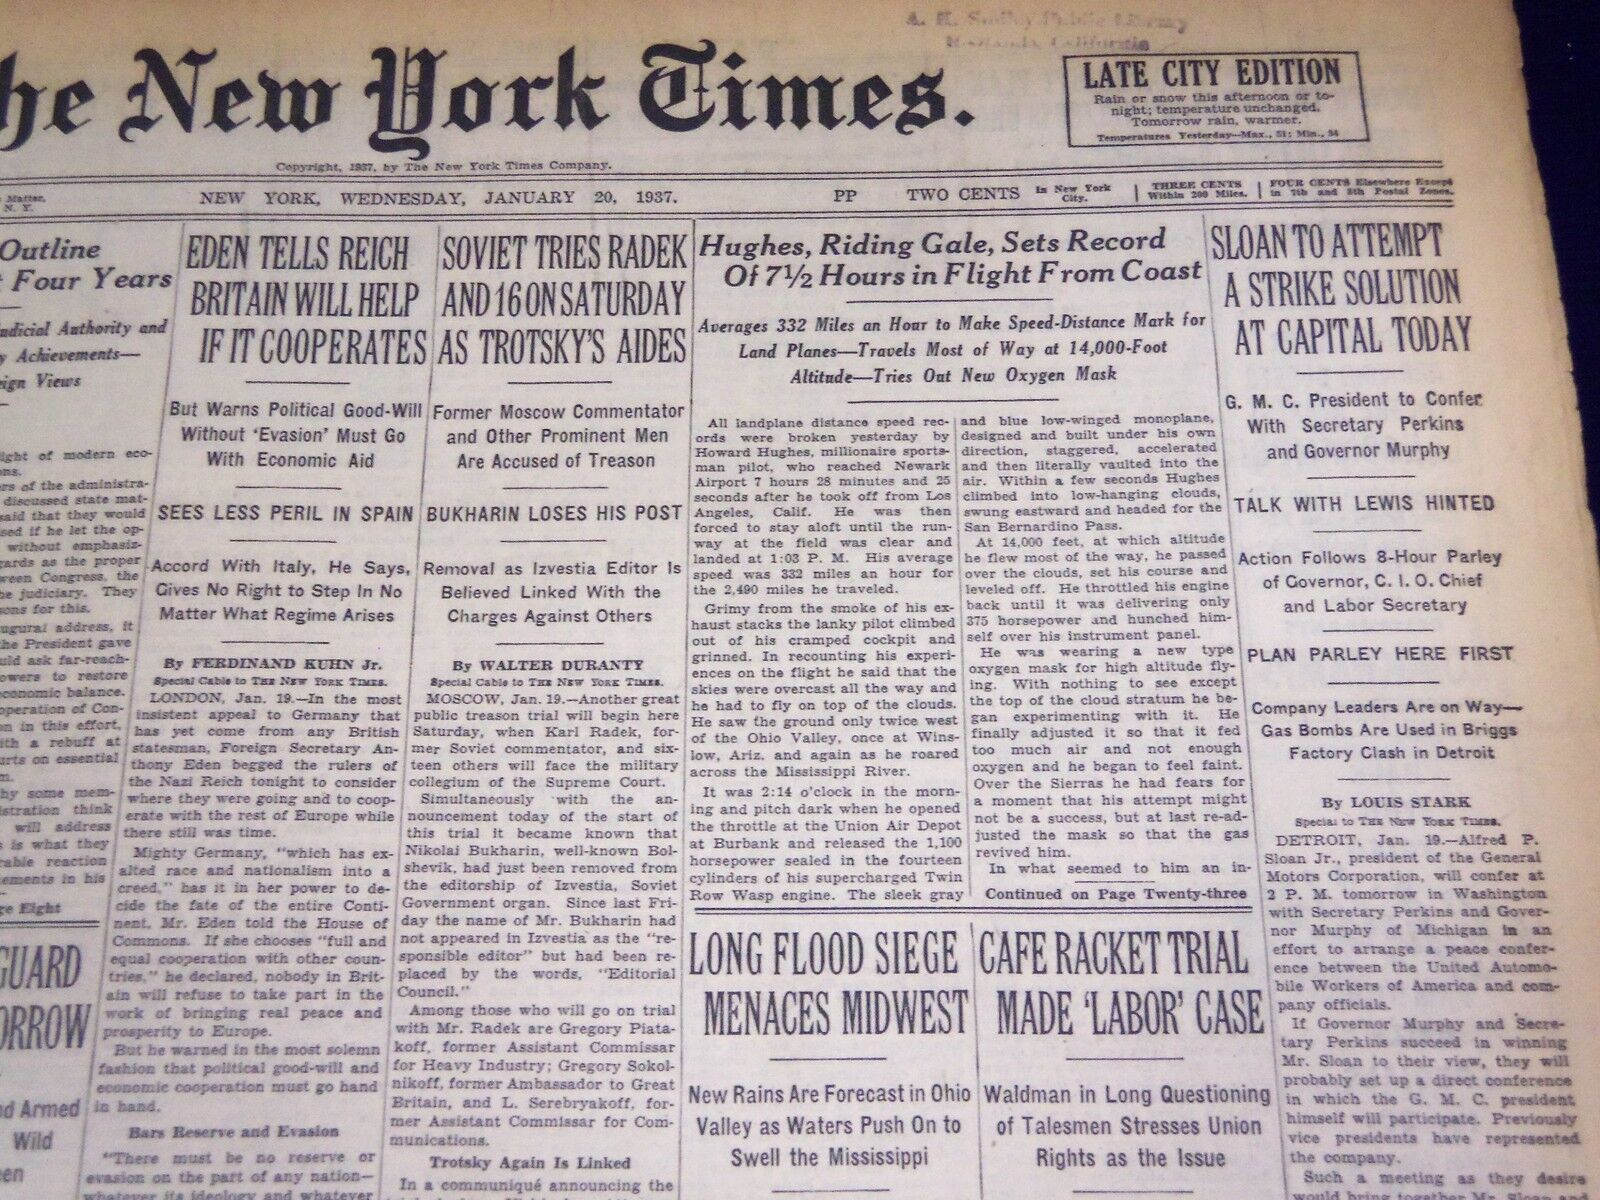 1937 JAN 20 NEW YORK TIMES - HUGHES RIDING GALE SETS RECORD OF 7 1/2 HR - NT 719